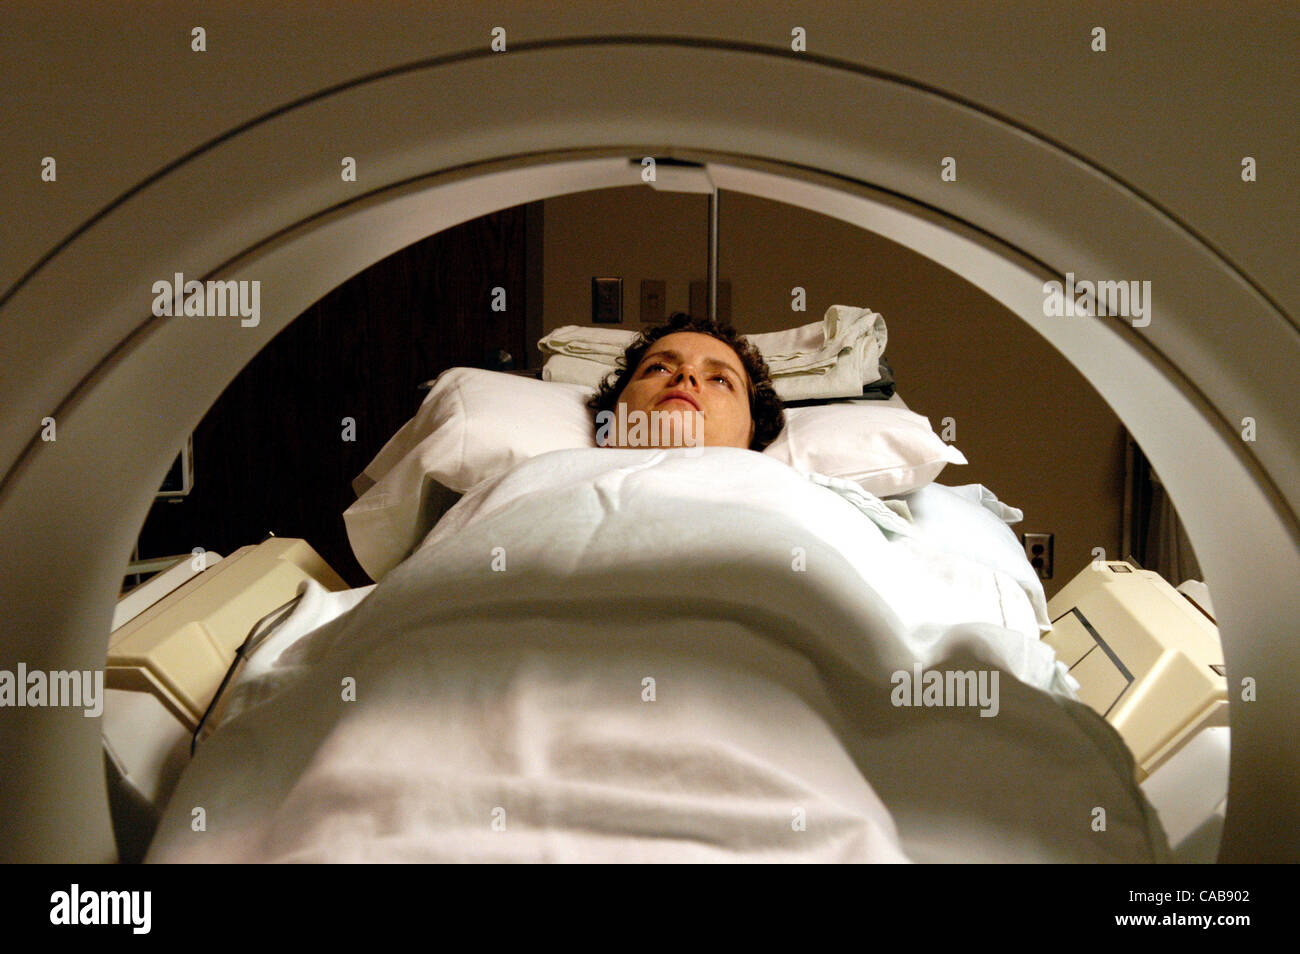 May 25, 2004; Marietta, GA, USA; Lung cancer patient JULIE GILMORE, 36, has a bone scan in the nuclear medicine department of Marietta Hospital. Stock Photo